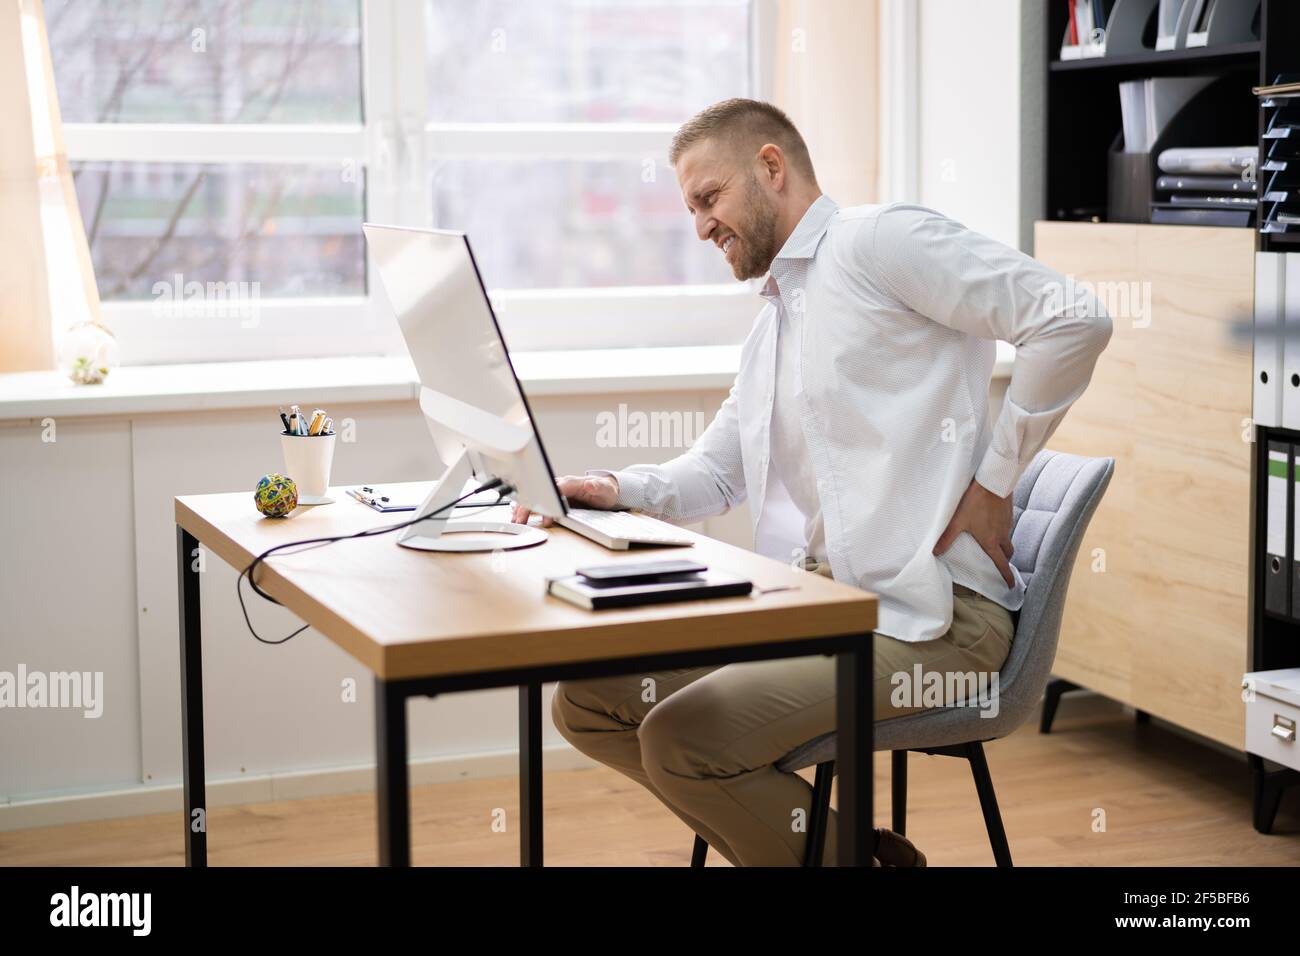 Bad Posture Sitting At Office Desk Using Computer Stock Photo